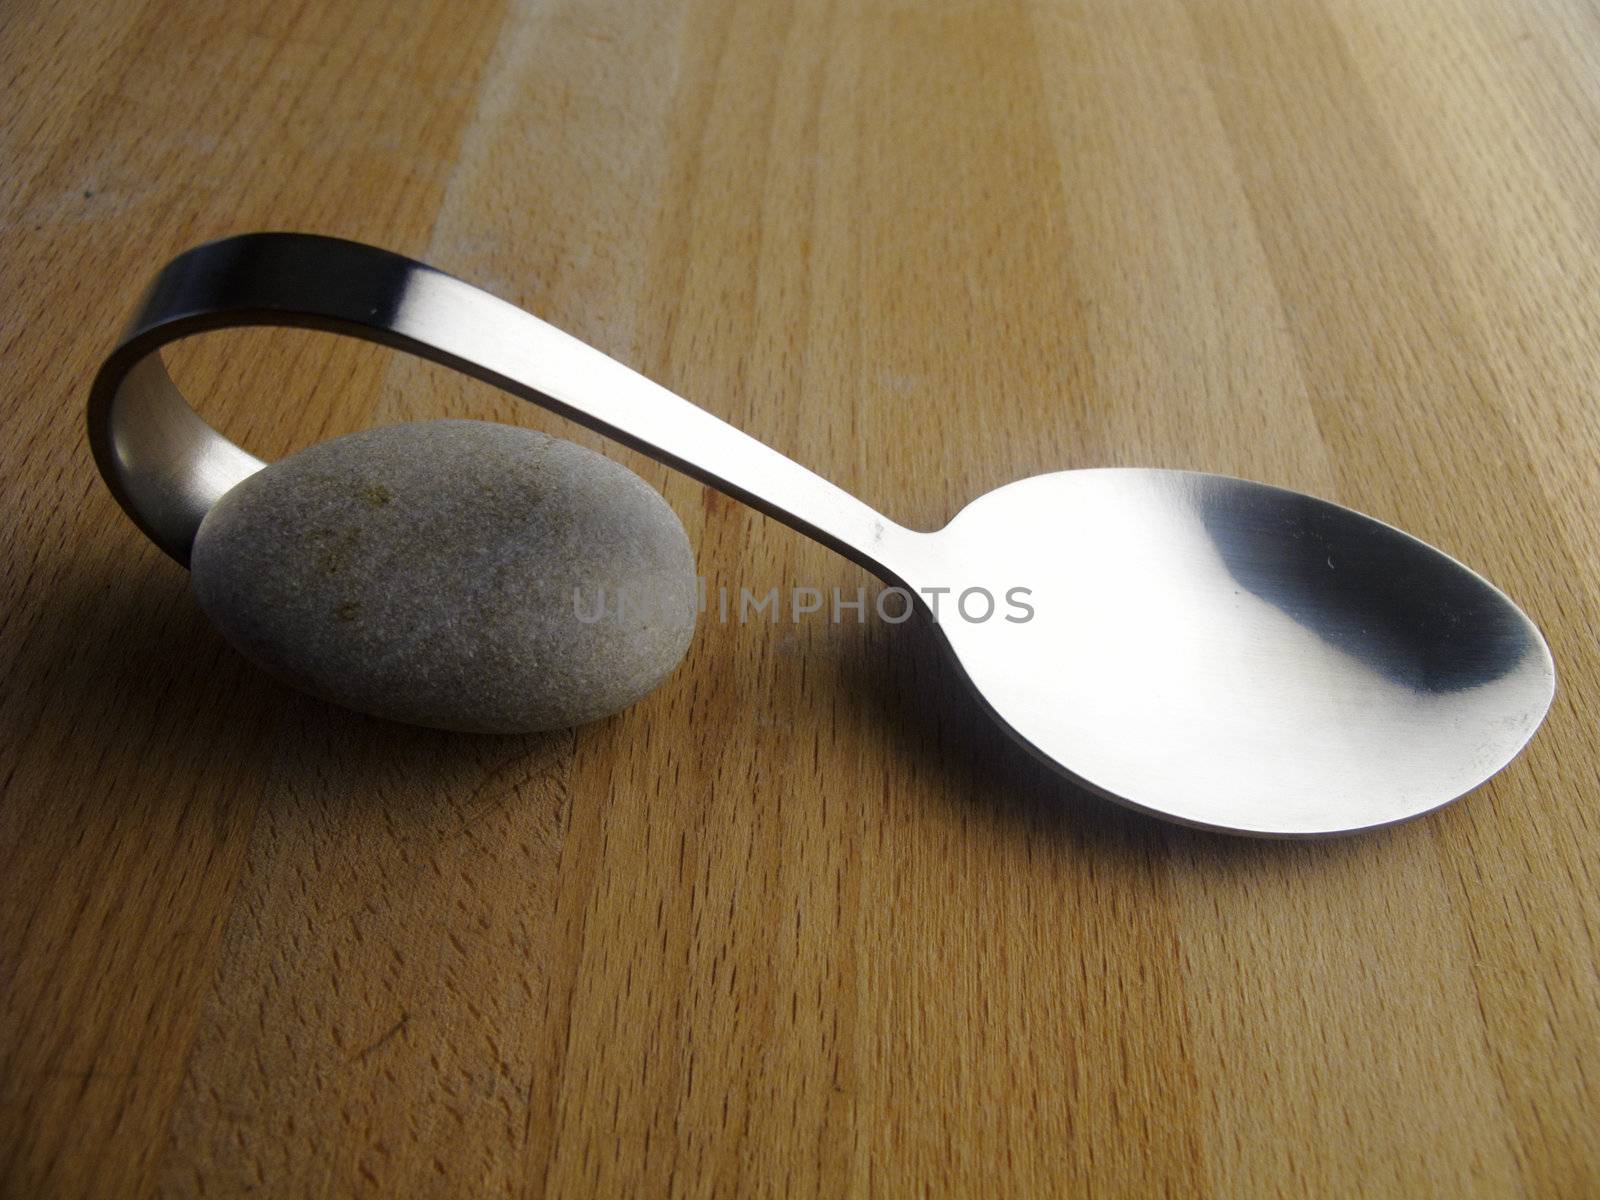 detail of a spoon with interesting curves